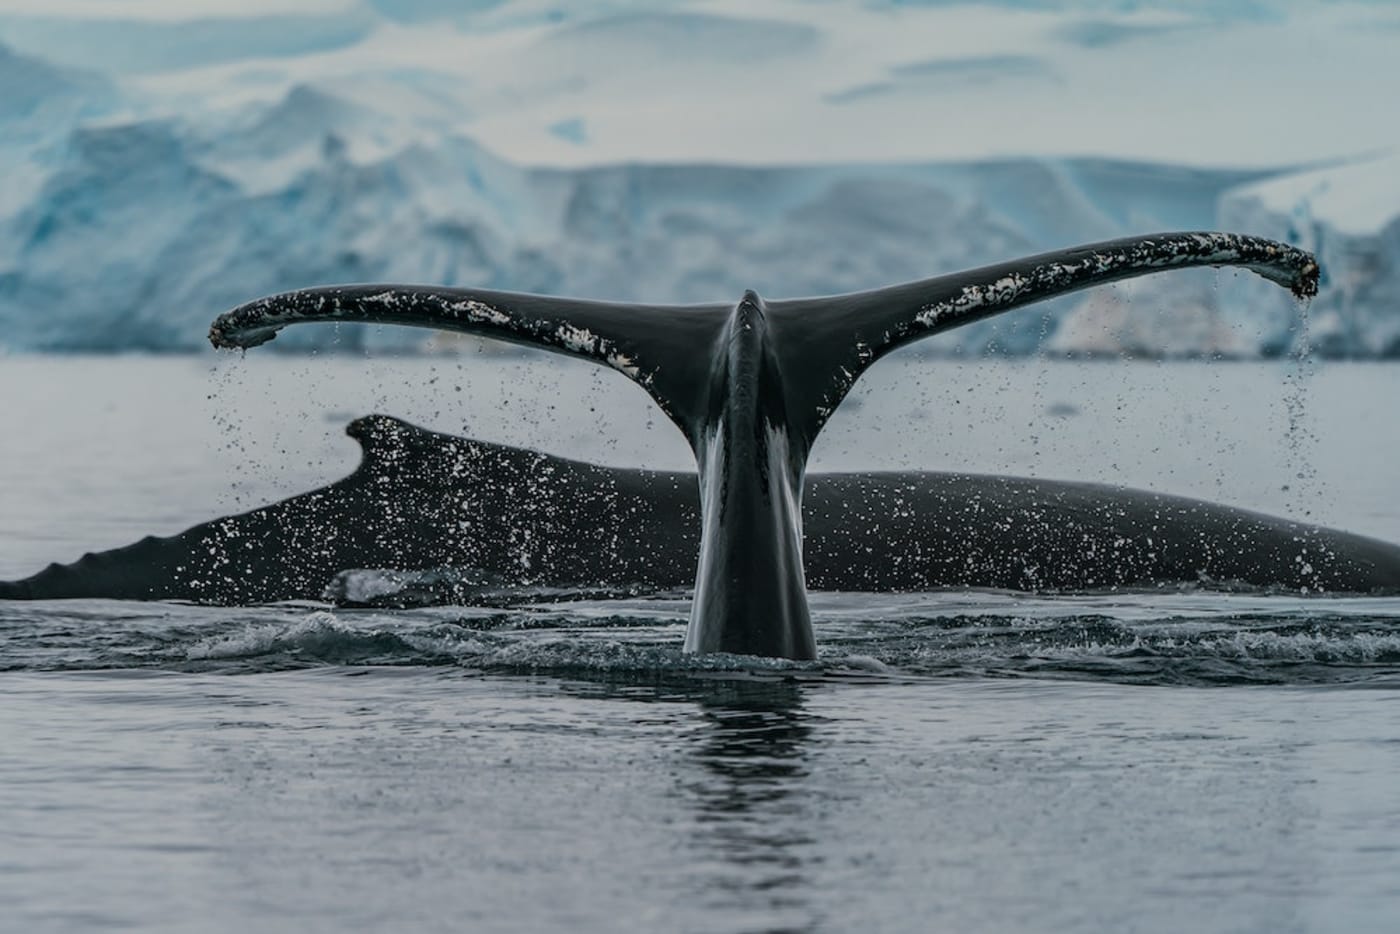 Humpback whales feeding in a bay in Antarctica